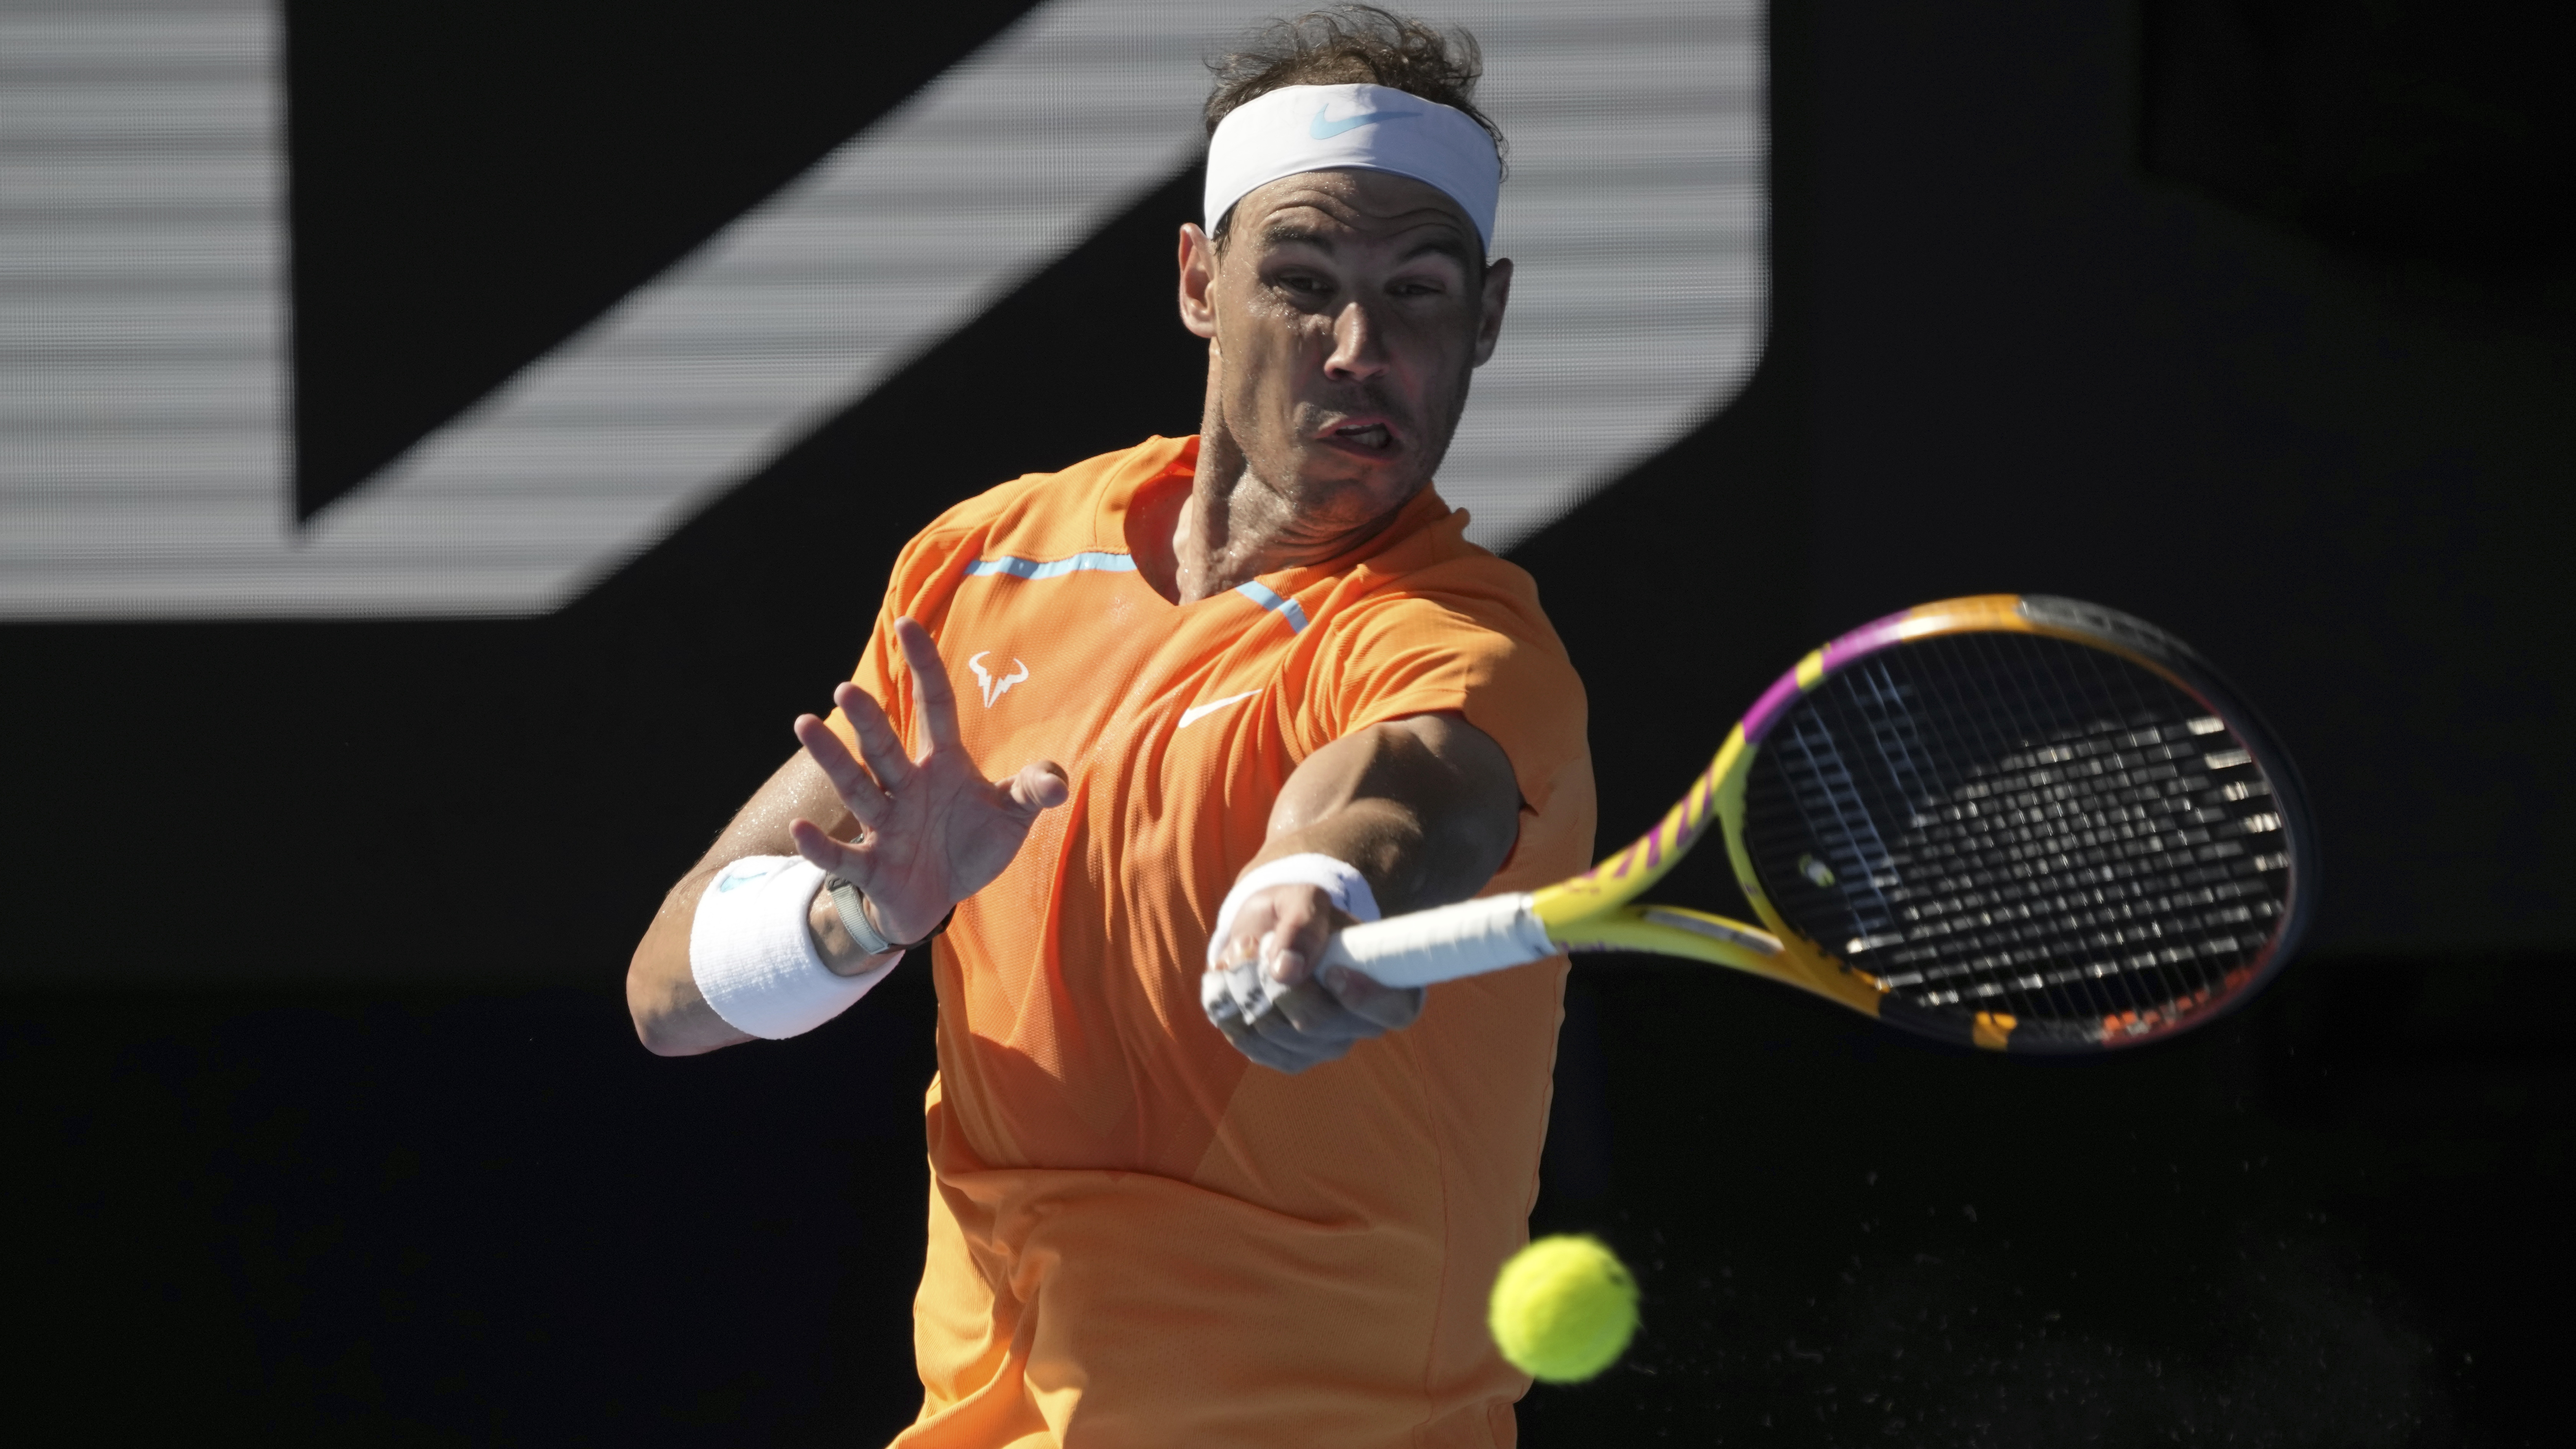 Rafael Nadal wins mediocre match in first round of Australian Open